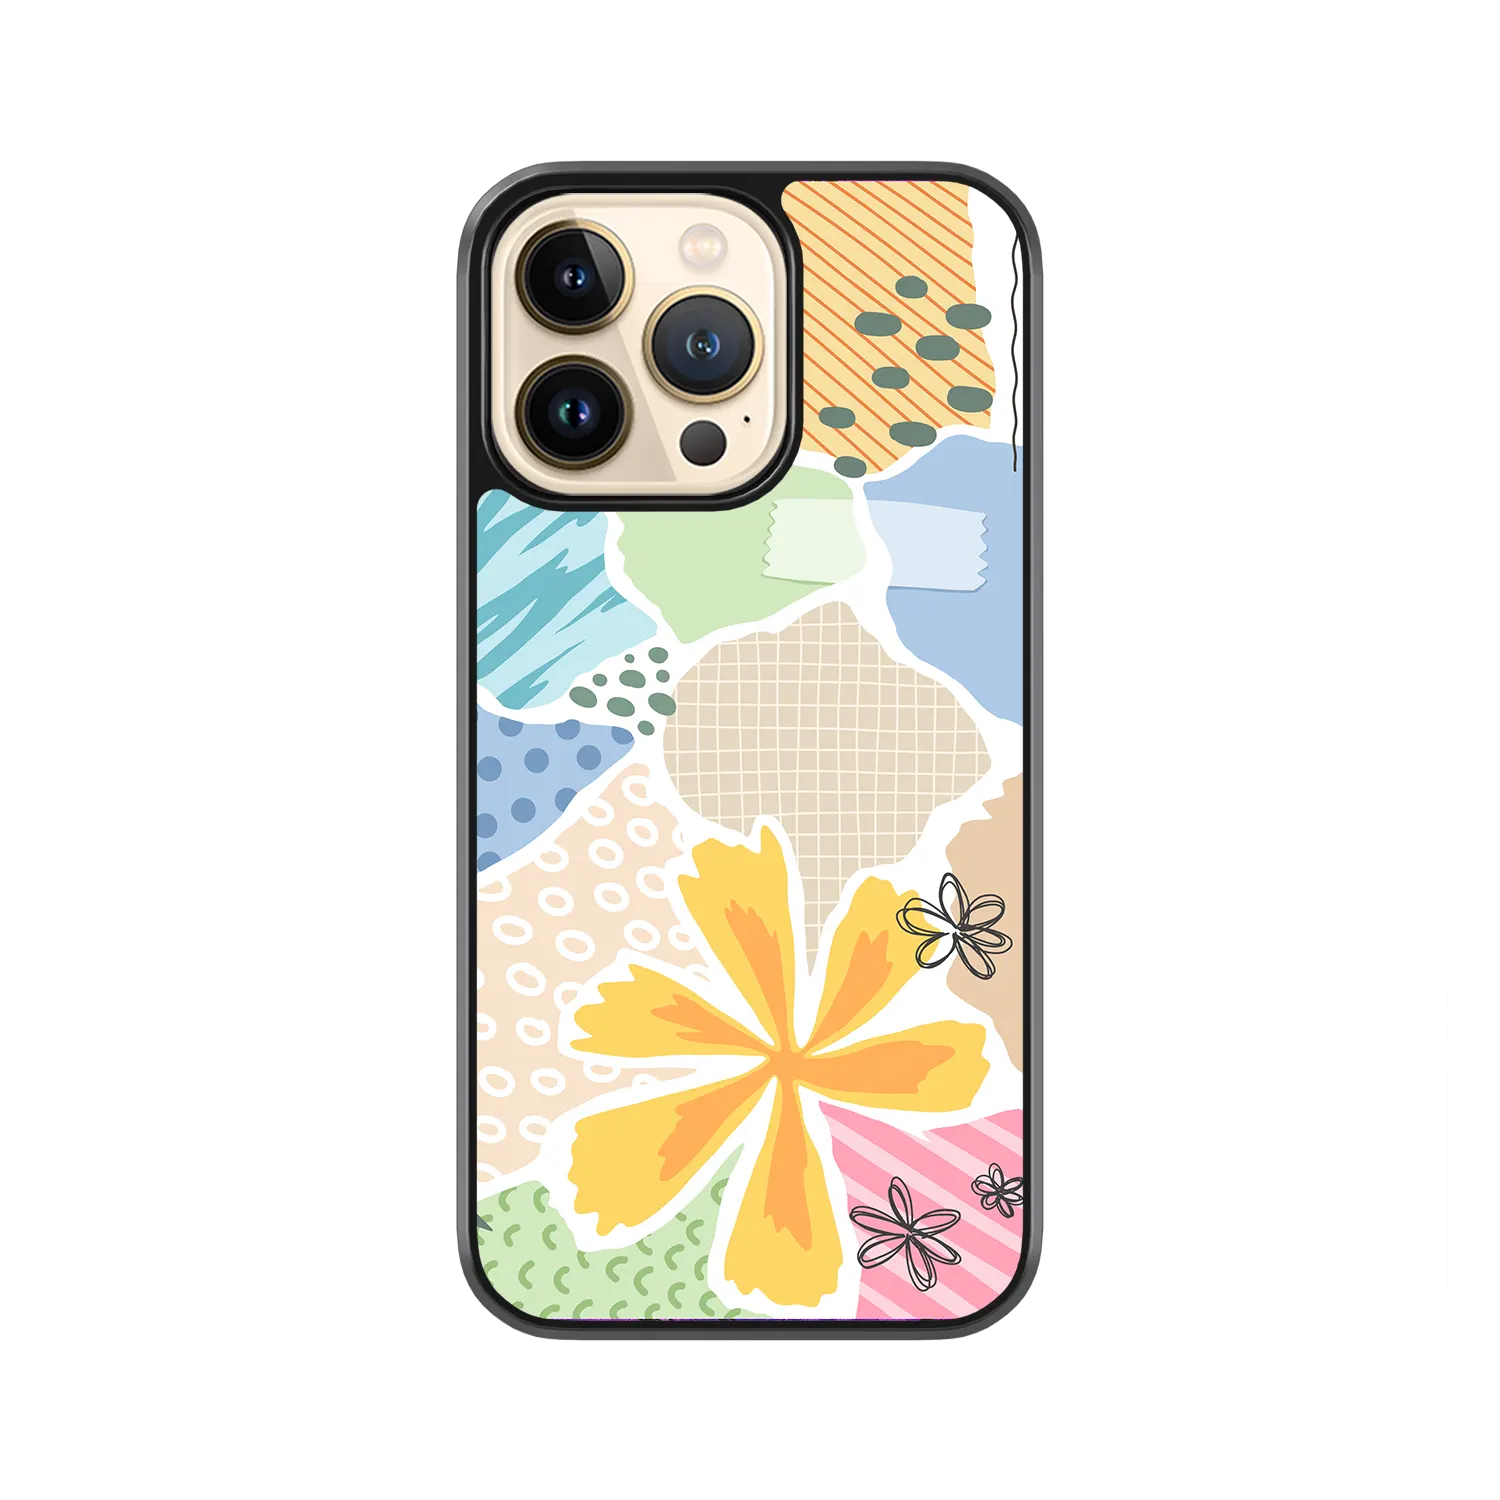 Floral Collage iphone 11 pro Max case